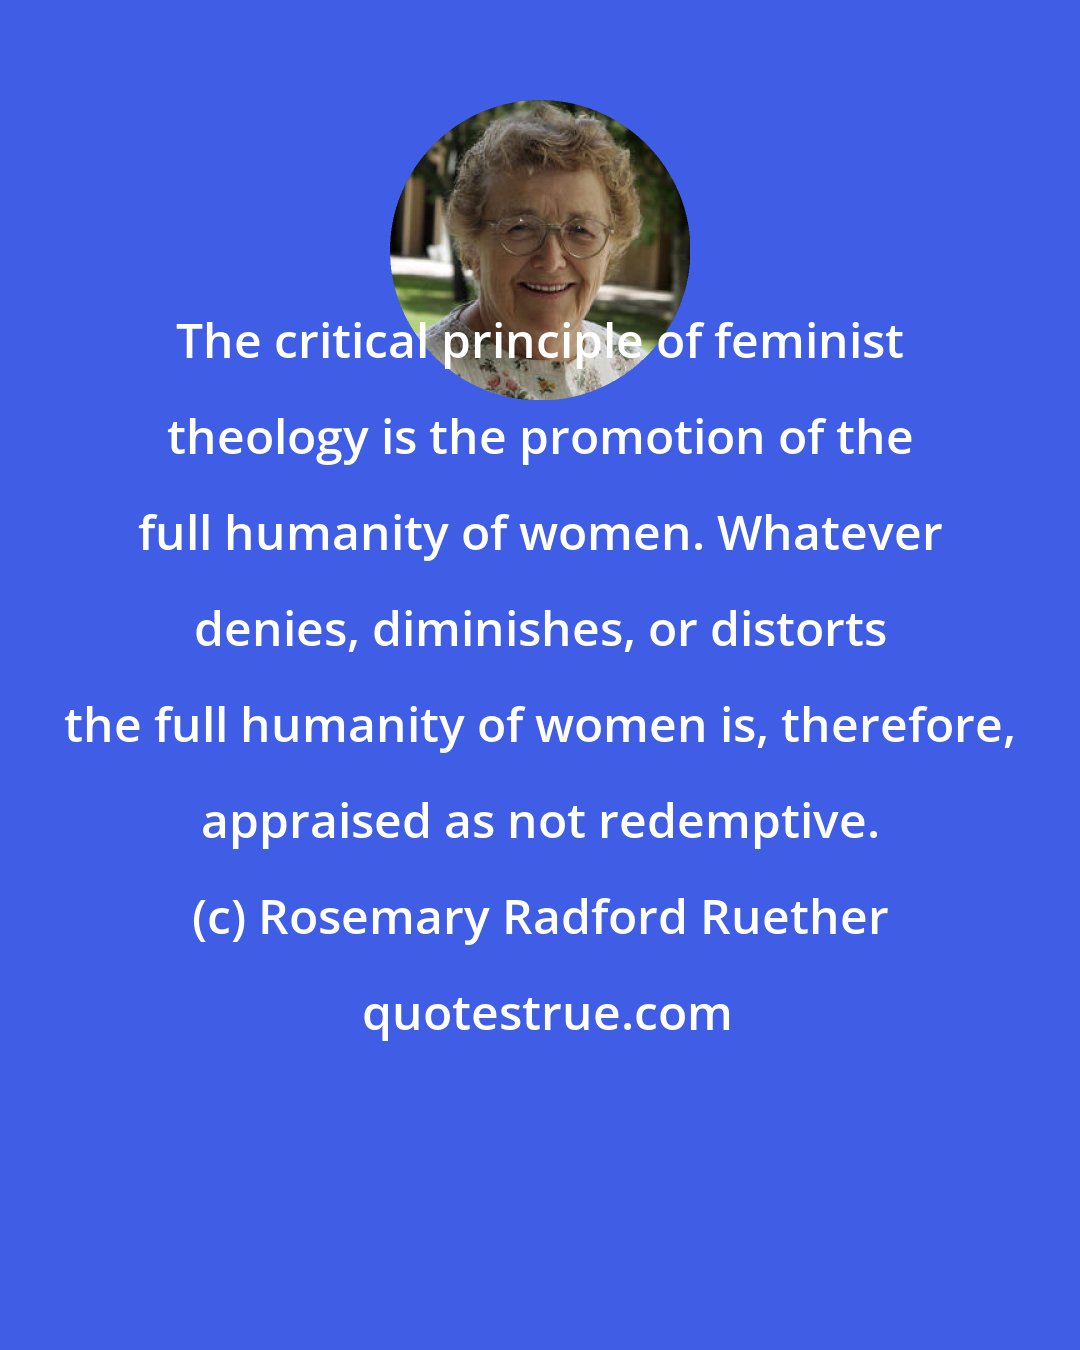 Rosemary Radford Ruether: The critical principle of feminist theology is the promotion of the full humanity of women. Whatever denies, diminishes, or distorts the full humanity of women is, therefore, appraised as not redemptive.